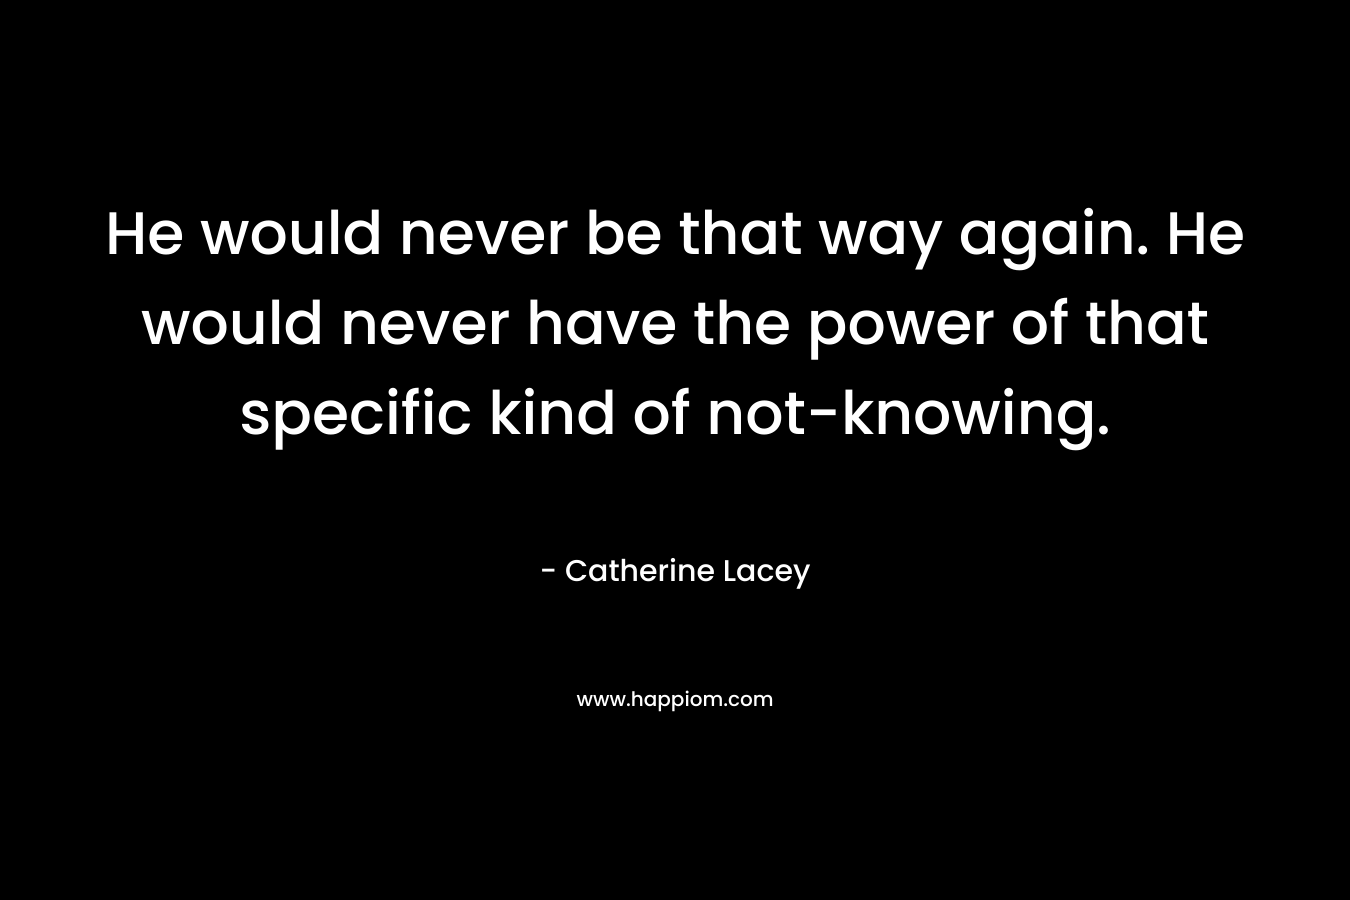 He would never be that way again. He would never have the power of that specific kind of not-knowing. – Catherine Lacey